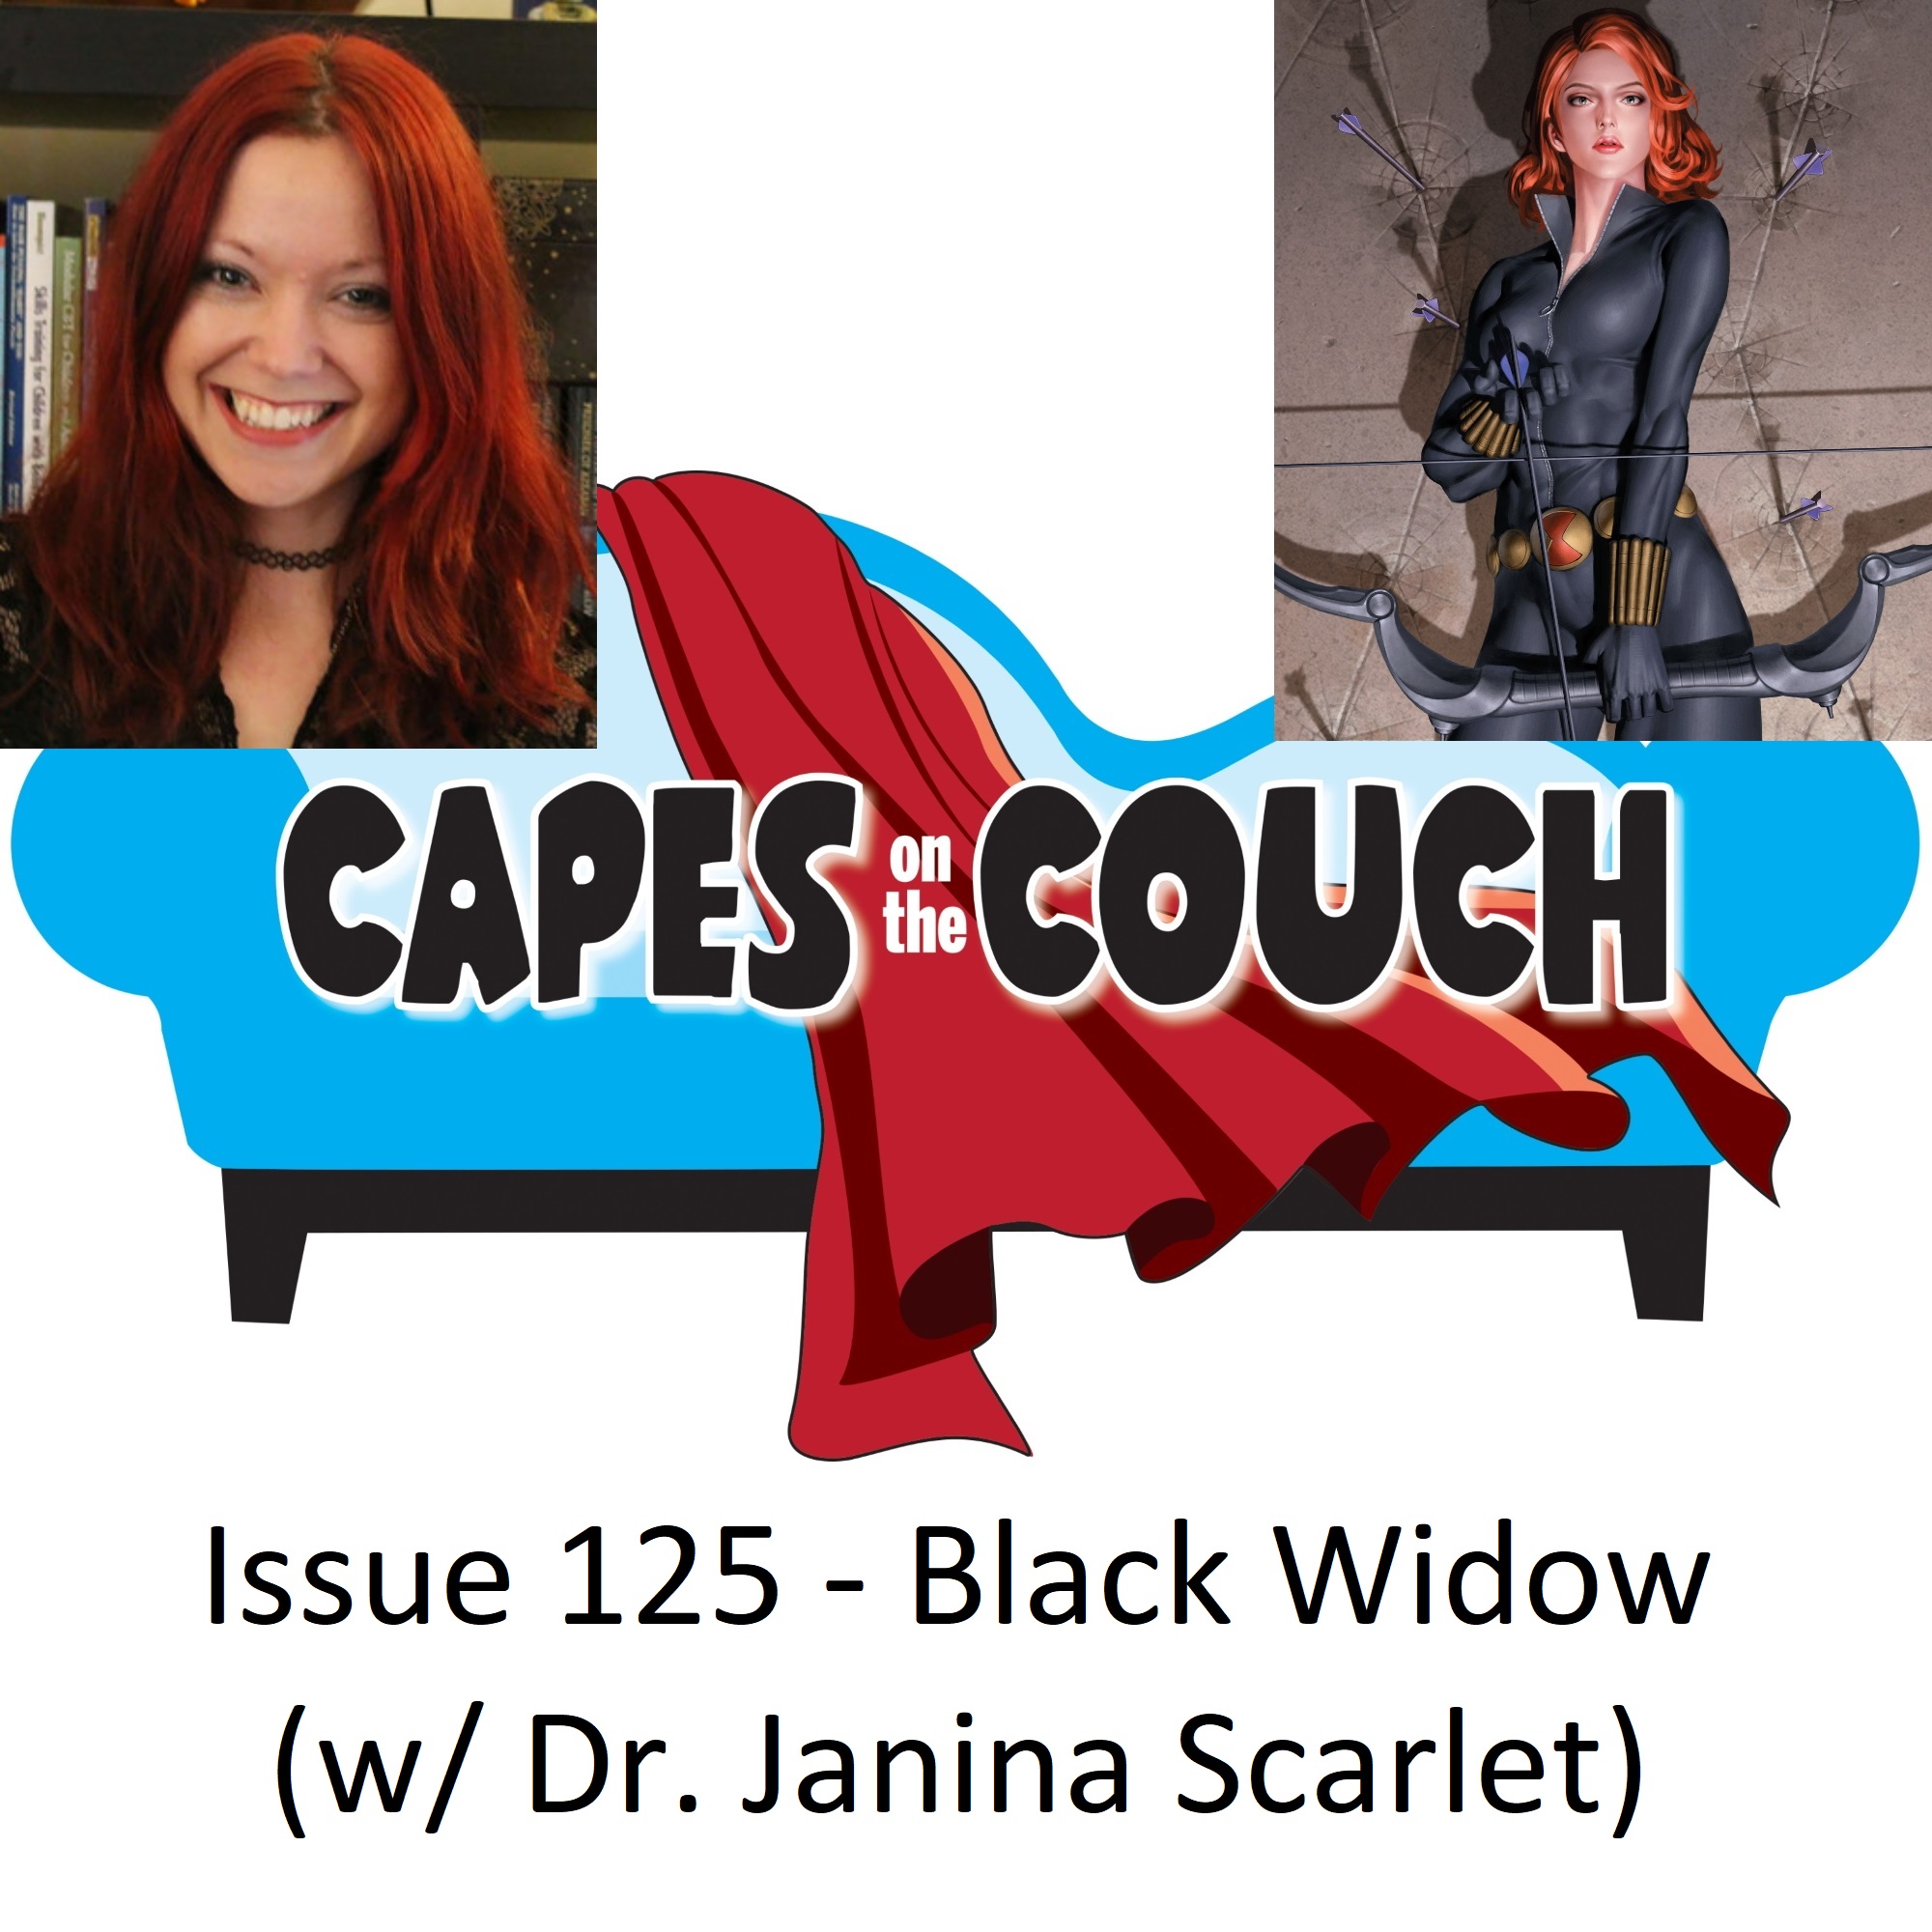 Issue 125 – Black Widow (with Dr. Janina Scarlet) post thumbnail image